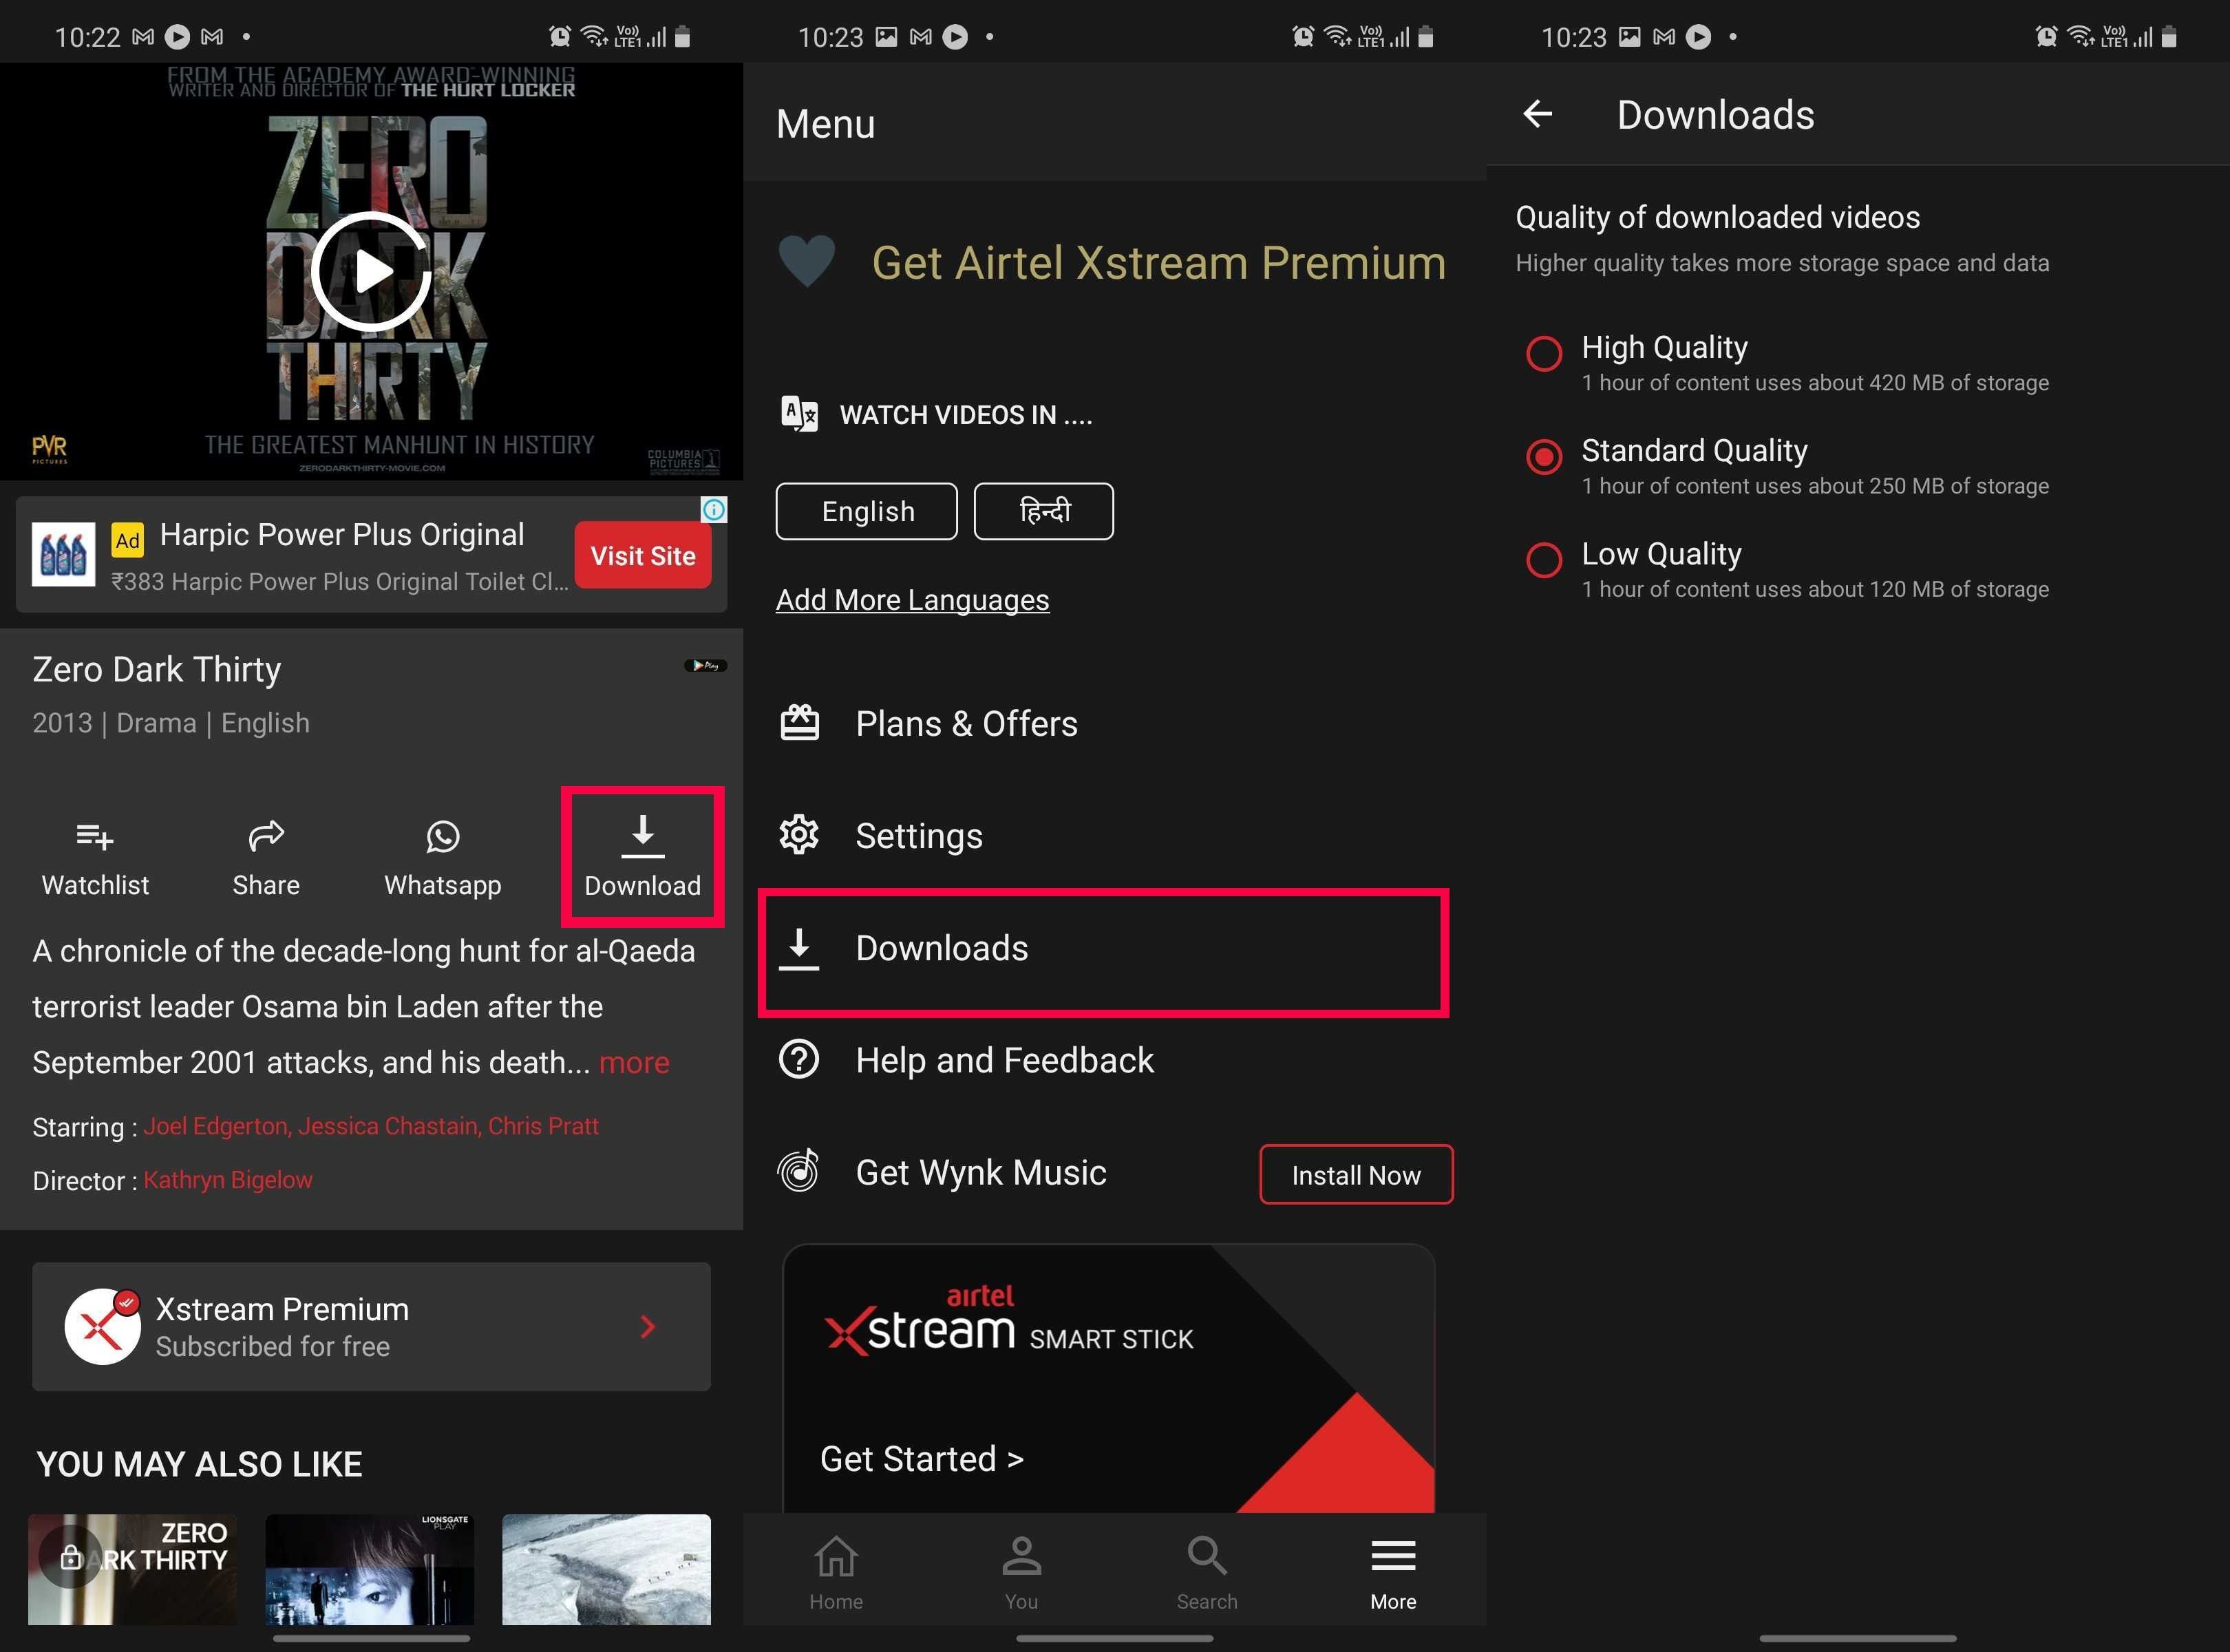 Airtel Xtreme app How to download movies in Airtel Xtreme app